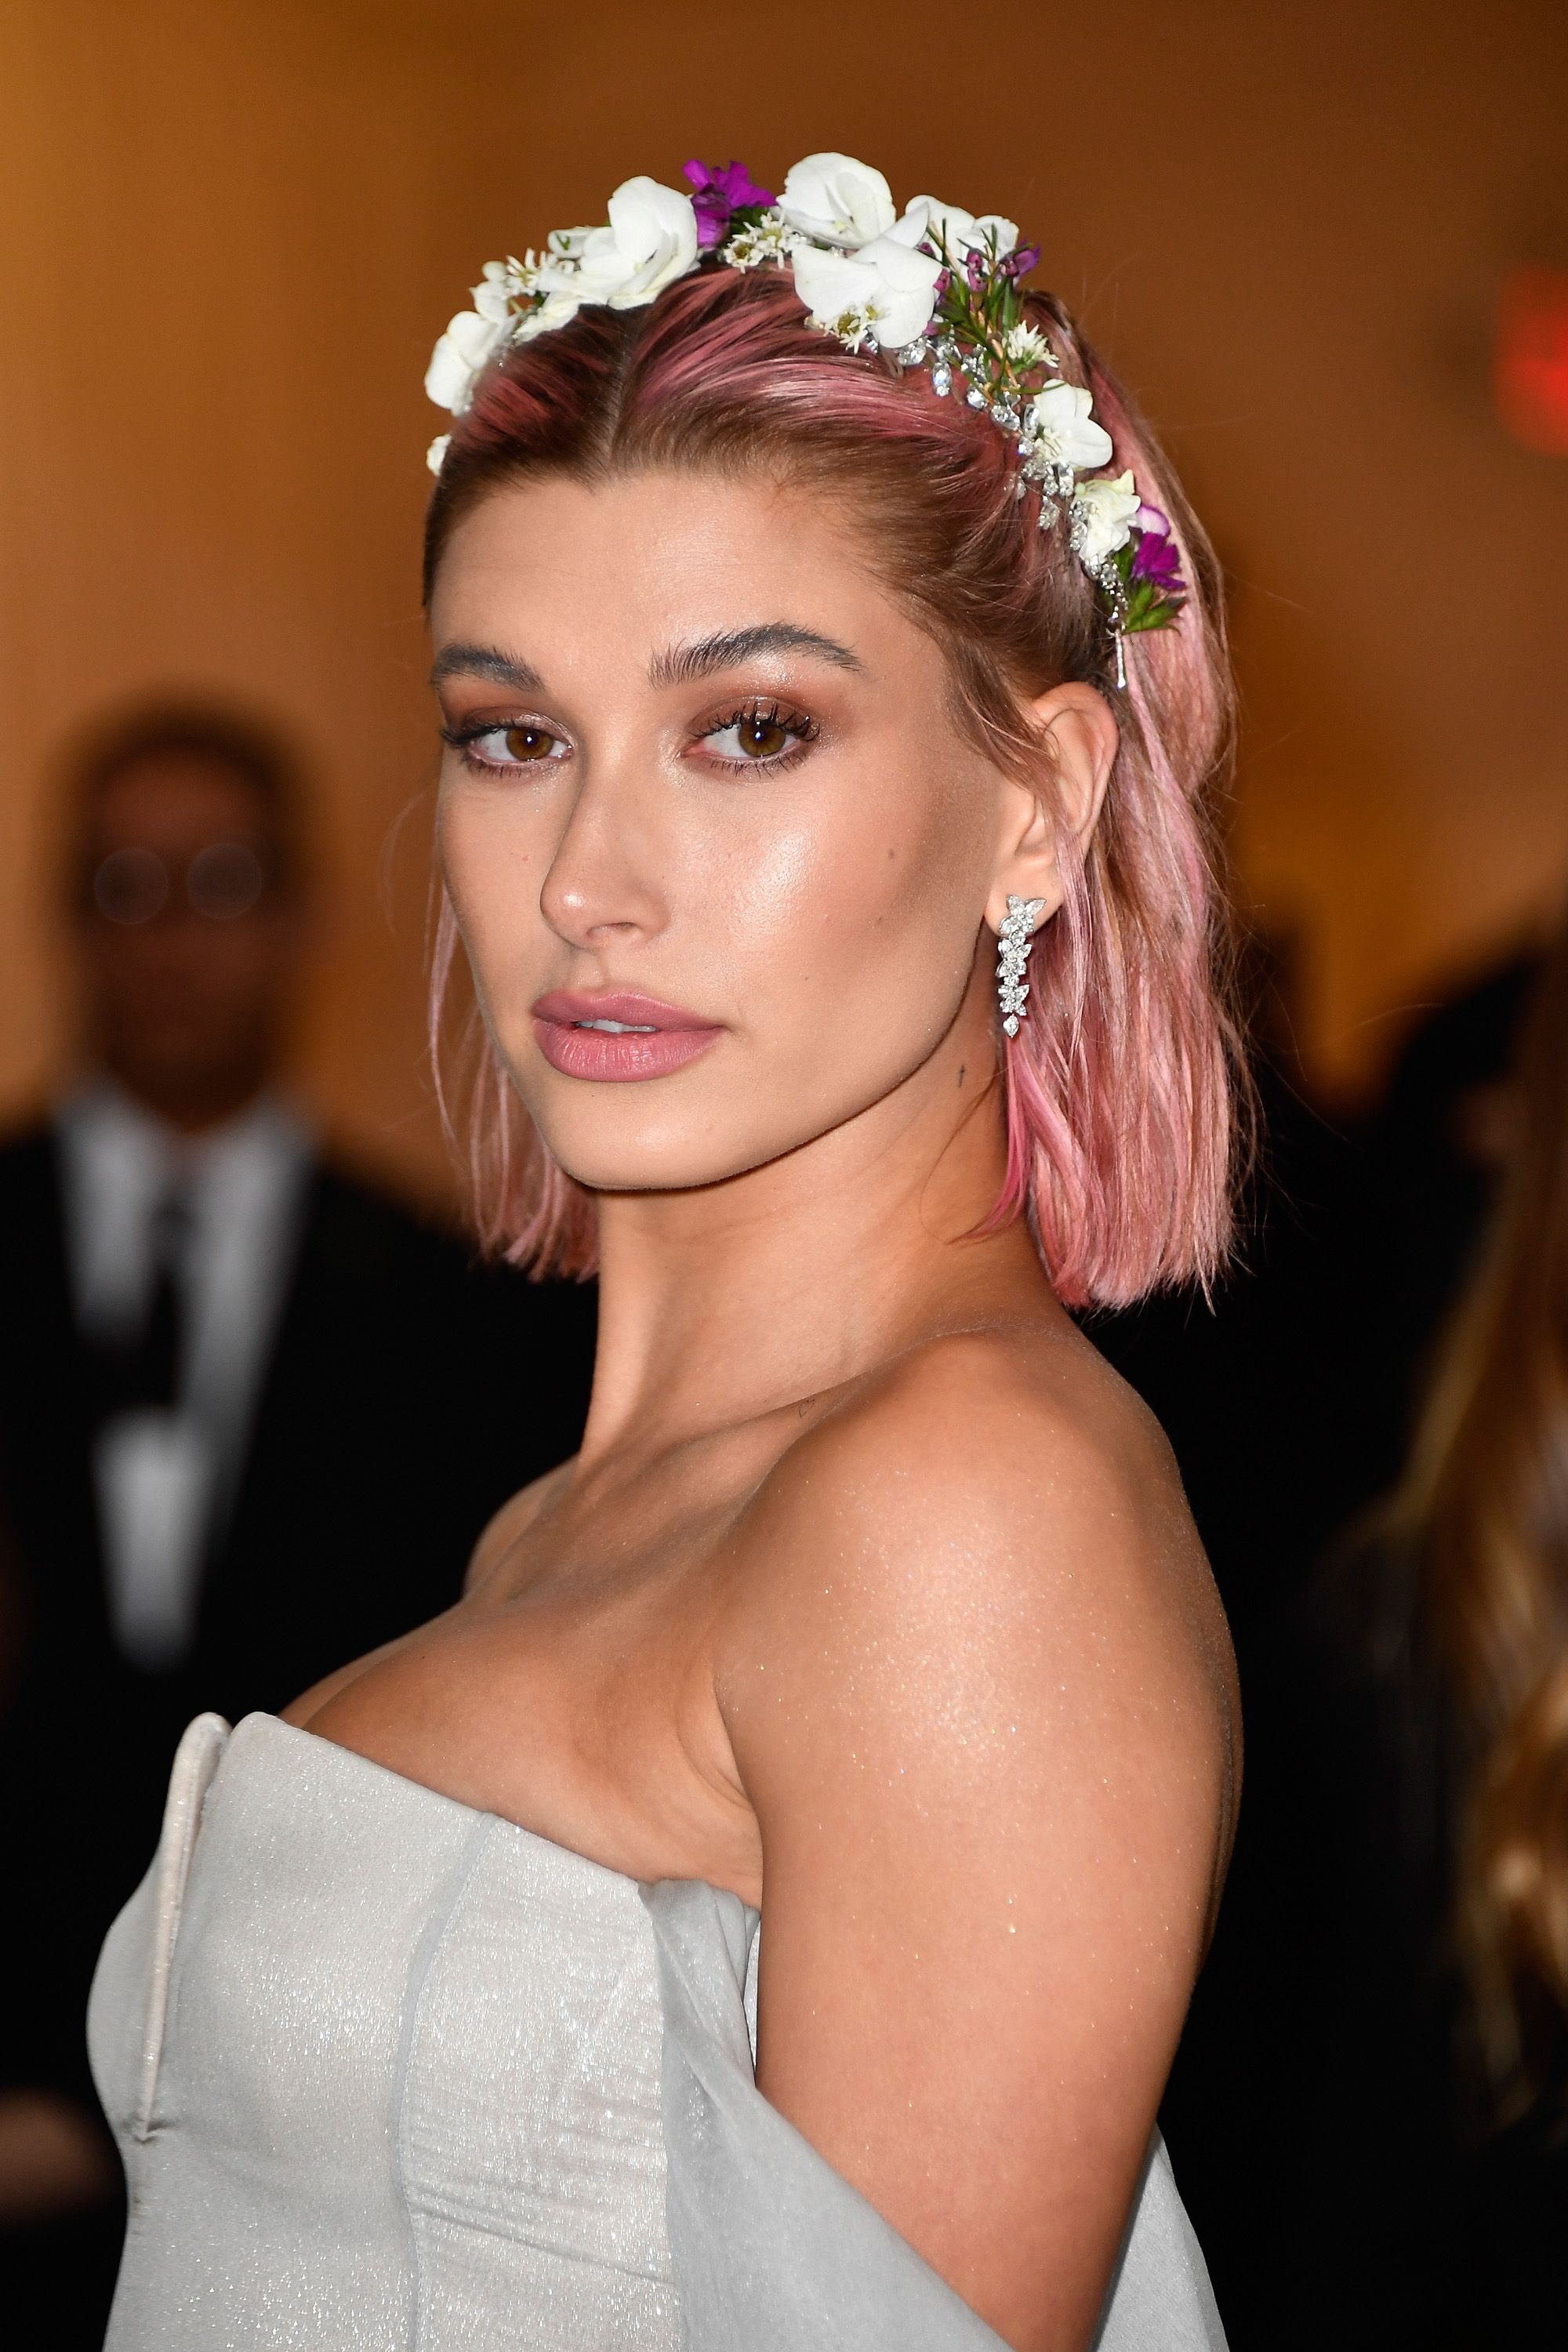 Hailey Baldwin Goes Brunette with Golden Highlights – Fashion Gone Rogue